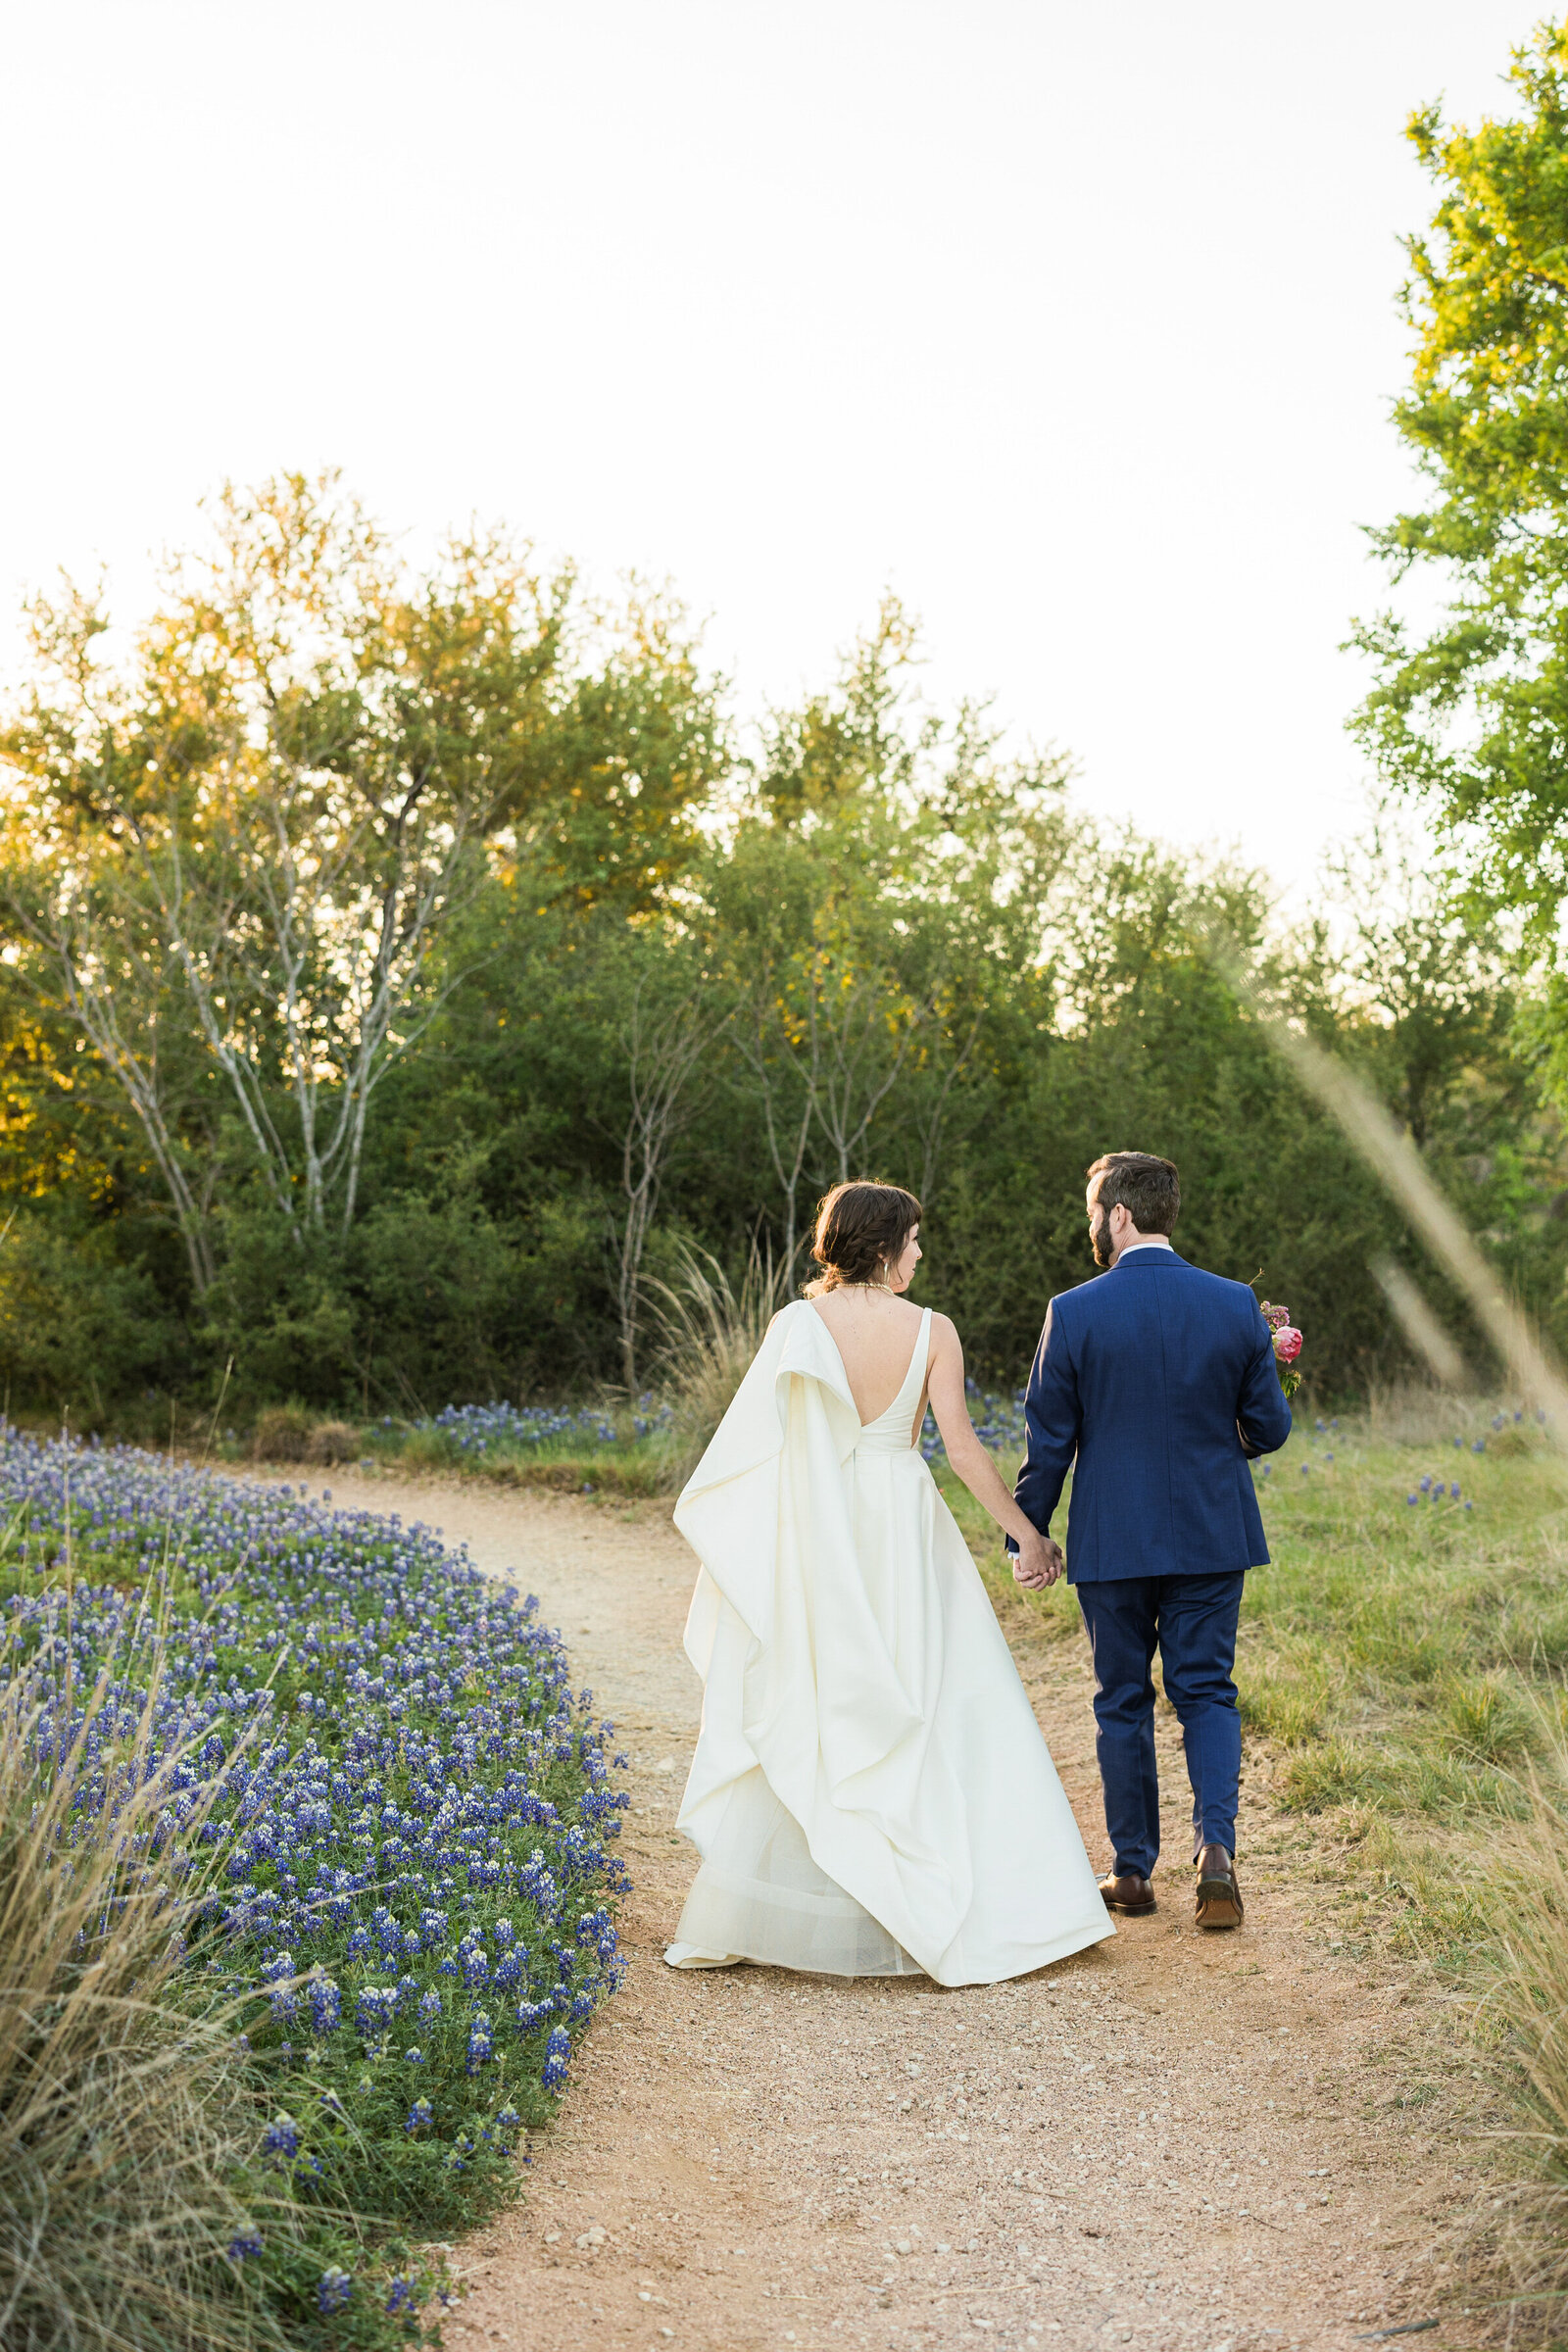 A bride and groom walking down a path away from the camera at the Lady Bird Johnson Wildflower Center in Austin, Texas. The bride is on the left and is wearing a flowing white dress. The groom is on the right and is wearing a blue suit with brown shoes and is holding a bouquet. They both are on a gravel path and are surrounded by wildflowers and trees.